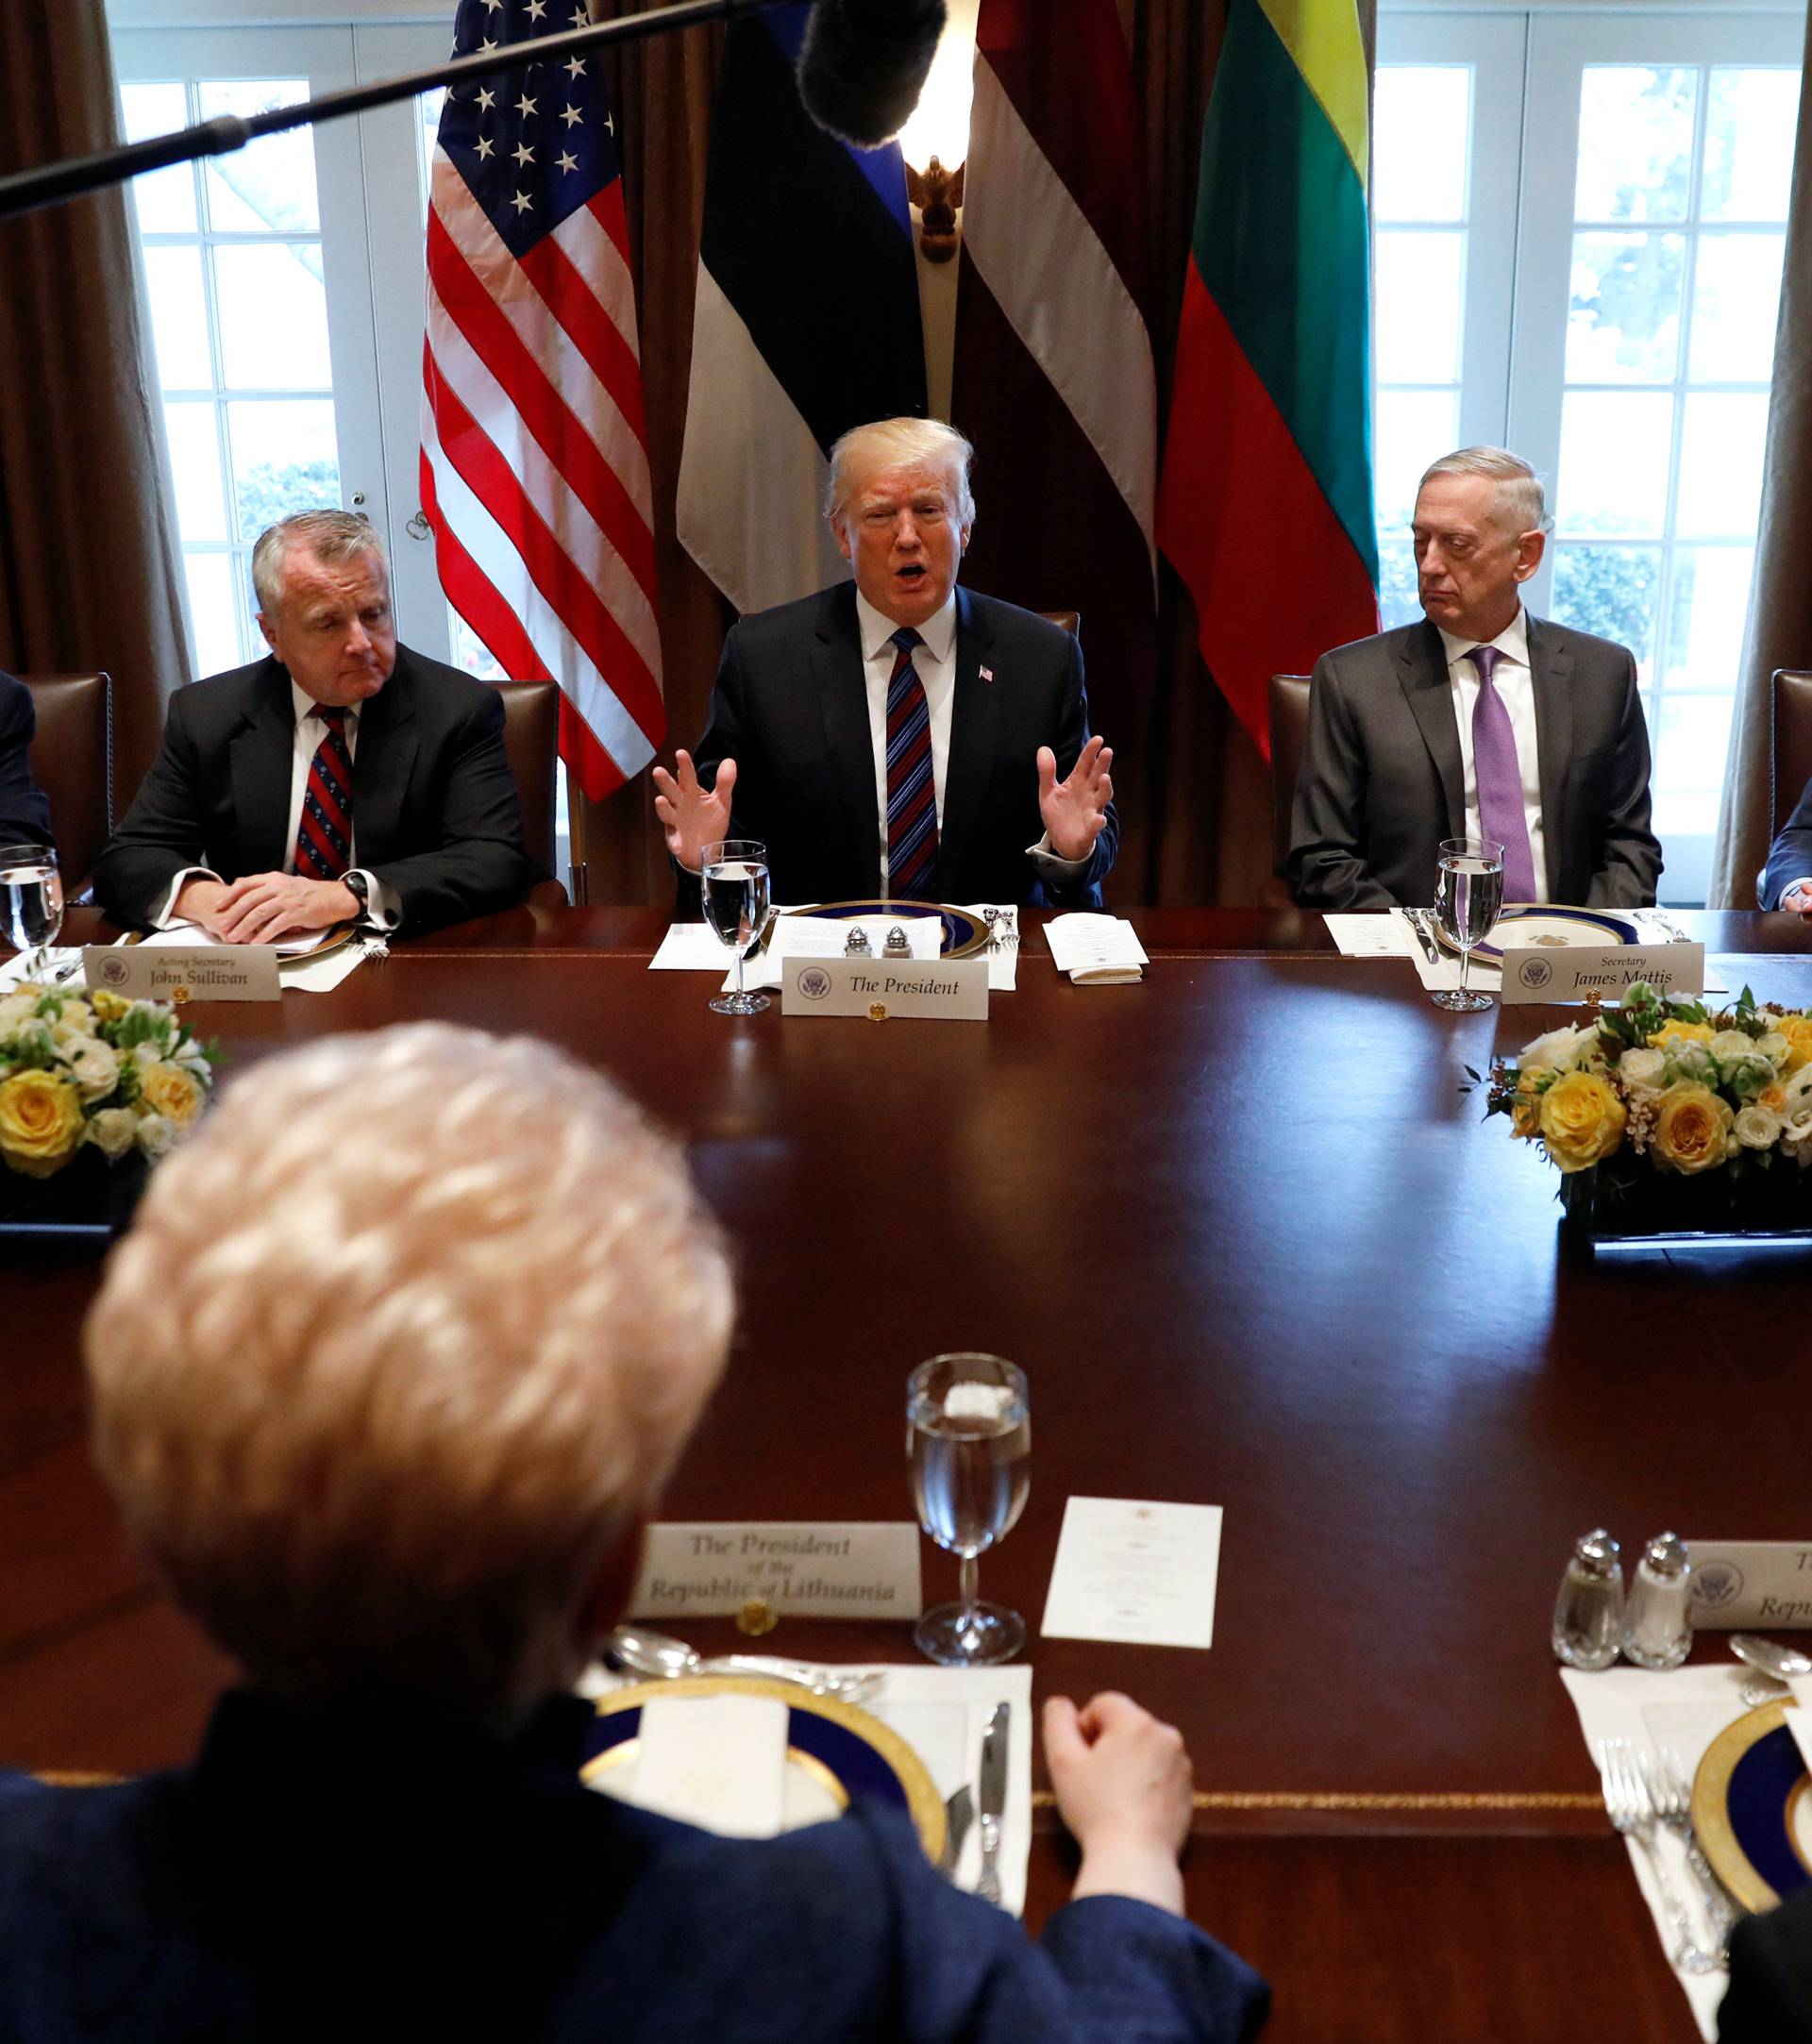 Trump hosts Baltic leaders at the White House in Washington